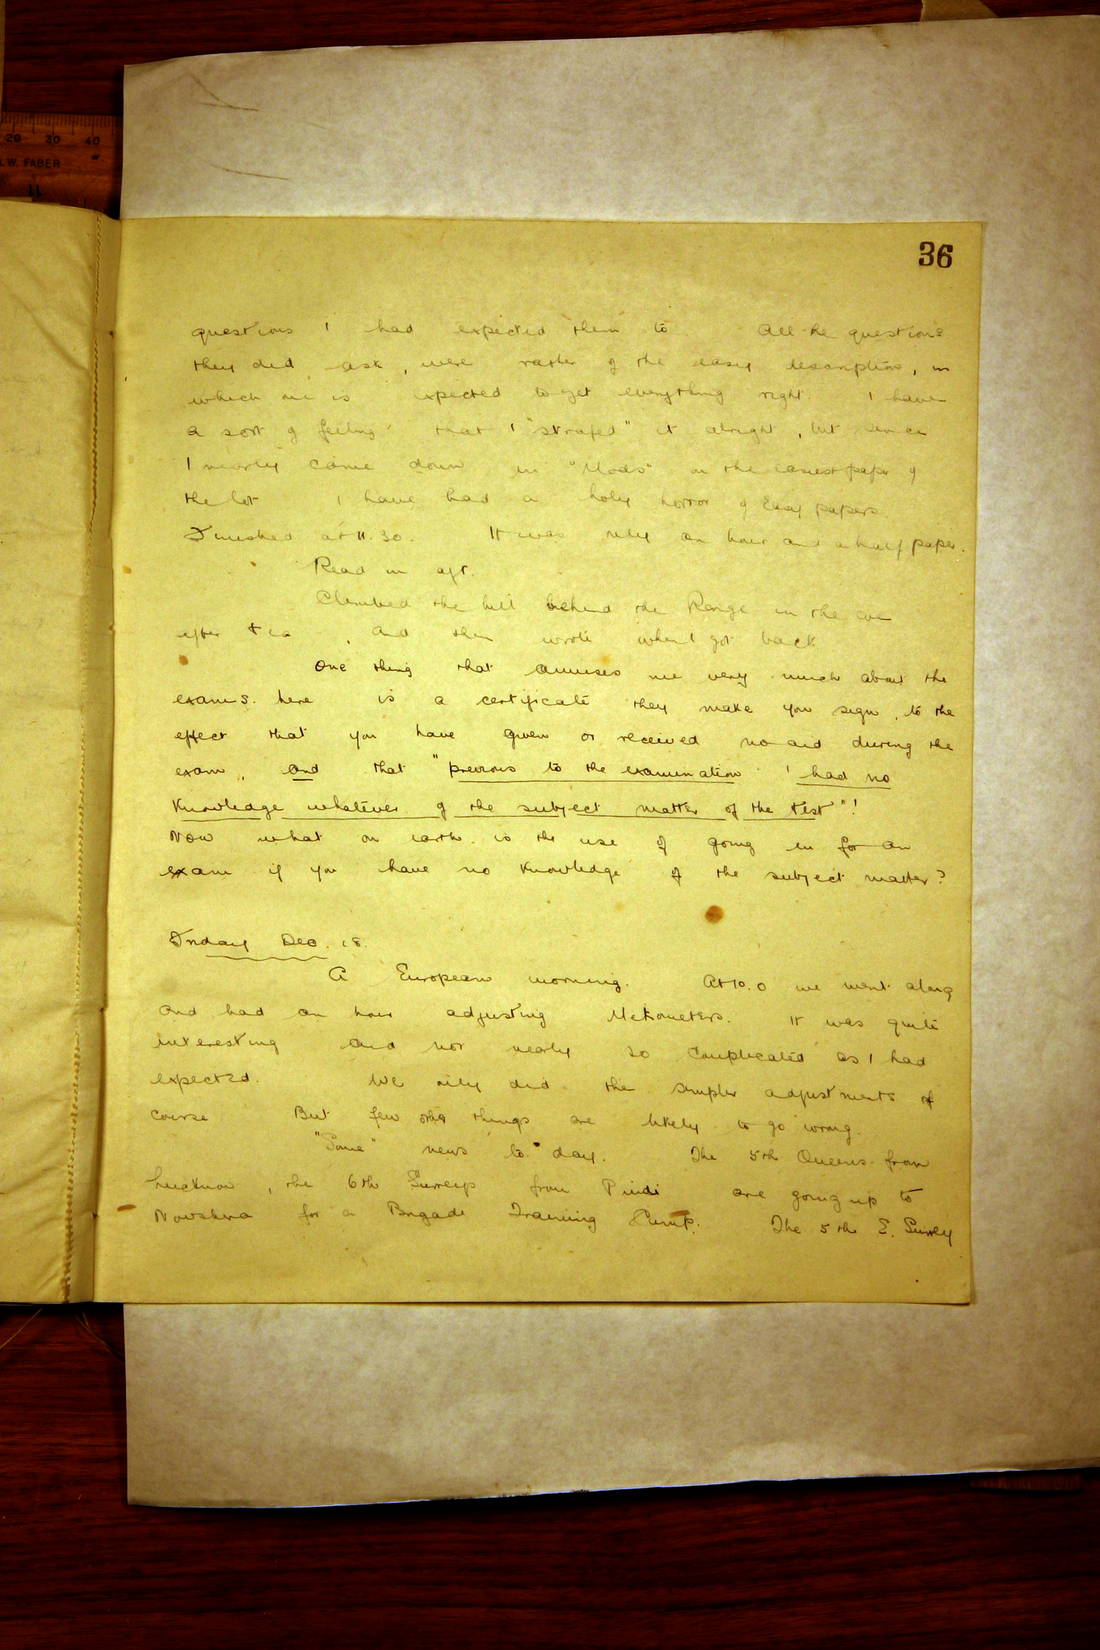 Scanned image of page book11 img_15017.jpg